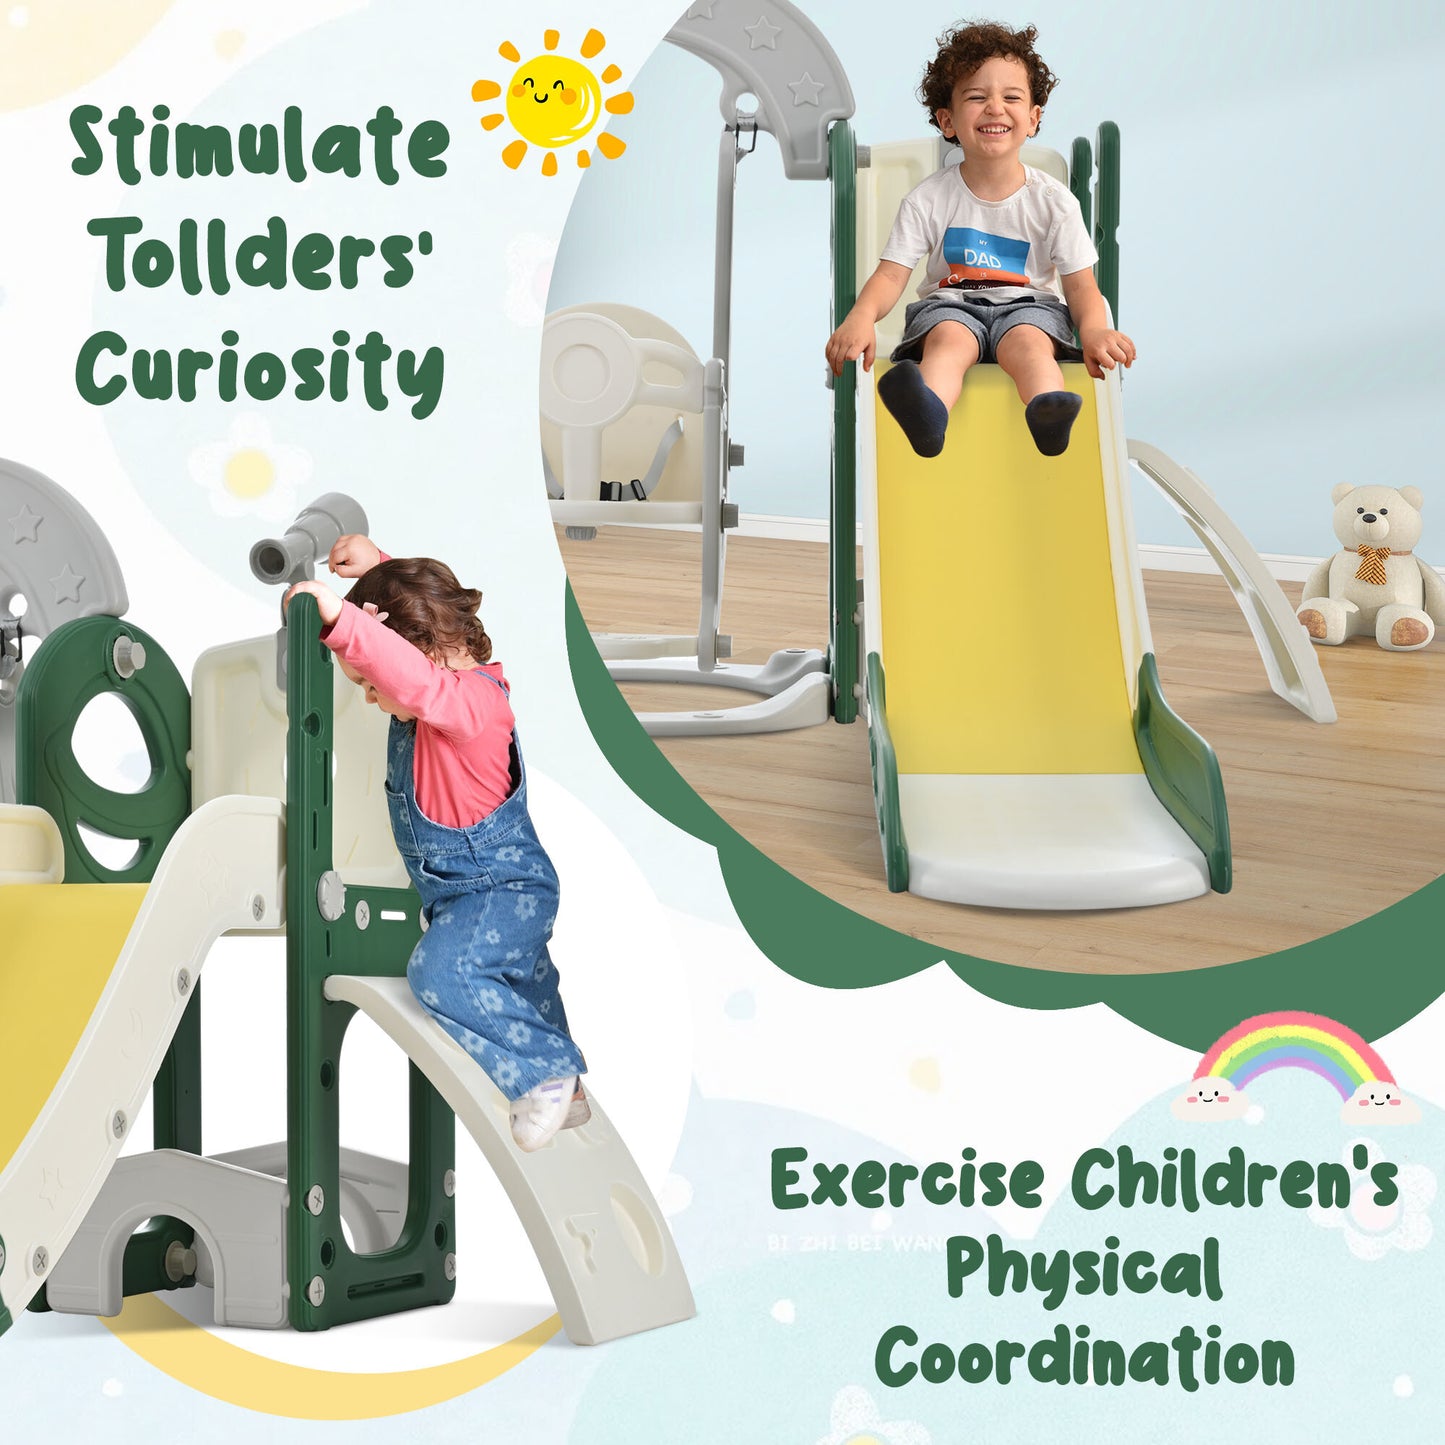 Toddler Slide and Swing Set 5 in 1, Kids Playground Climber Slide Playset with Telescope, Freestanding Combination for Babies Indoor & Outdoor